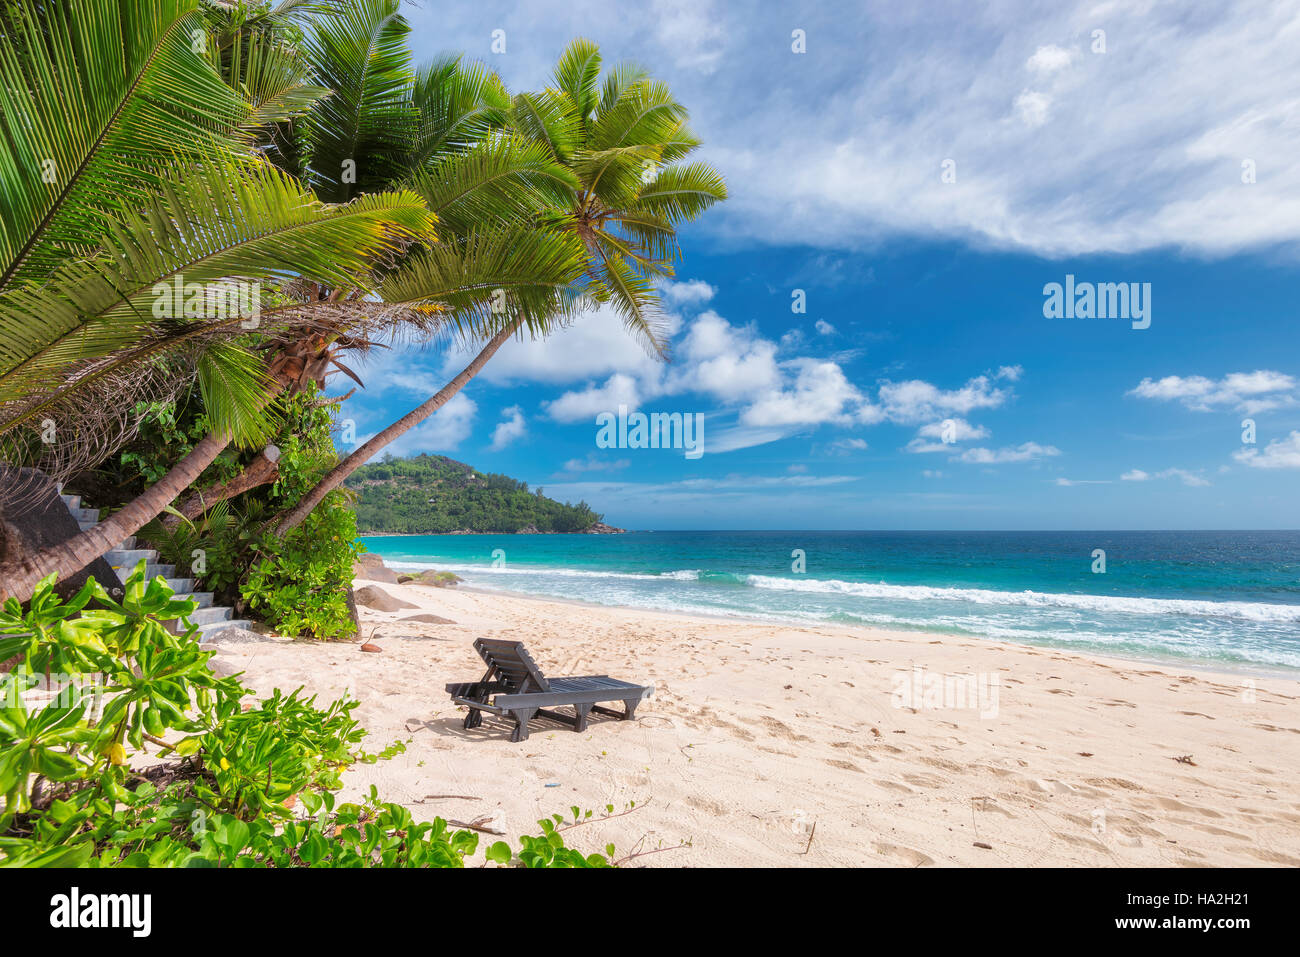 Tropical empty beach with beach chairs Stock Photo